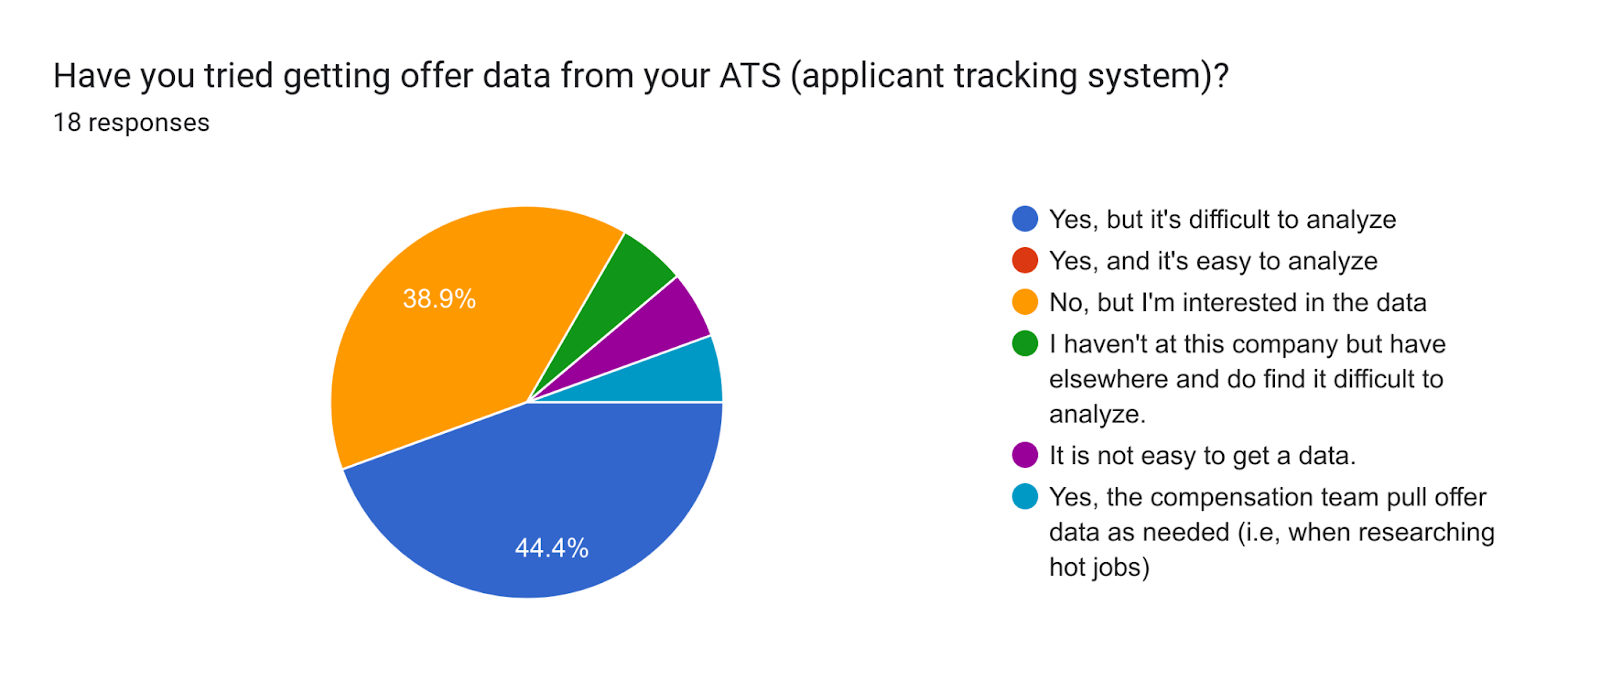 Forms response chart. Question title: Have you tried getting offer data from your ATS (applicant tracking system)?. Number of responses: 14 responses.